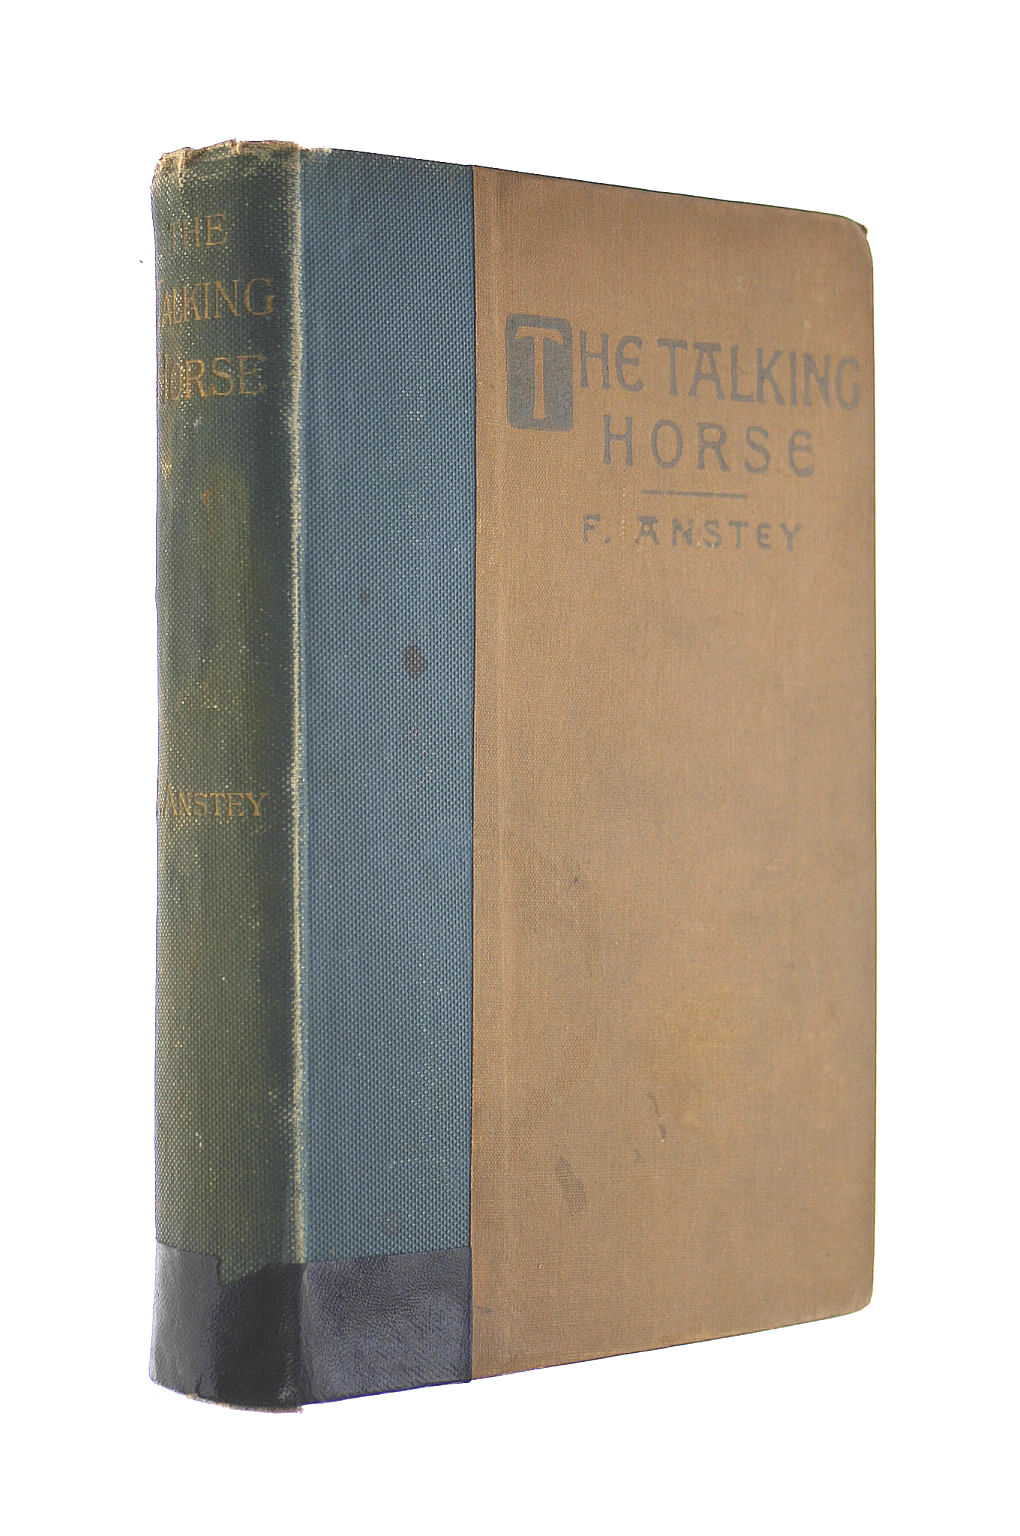 ANSTEY, F. - The Talking Horse, and other tales